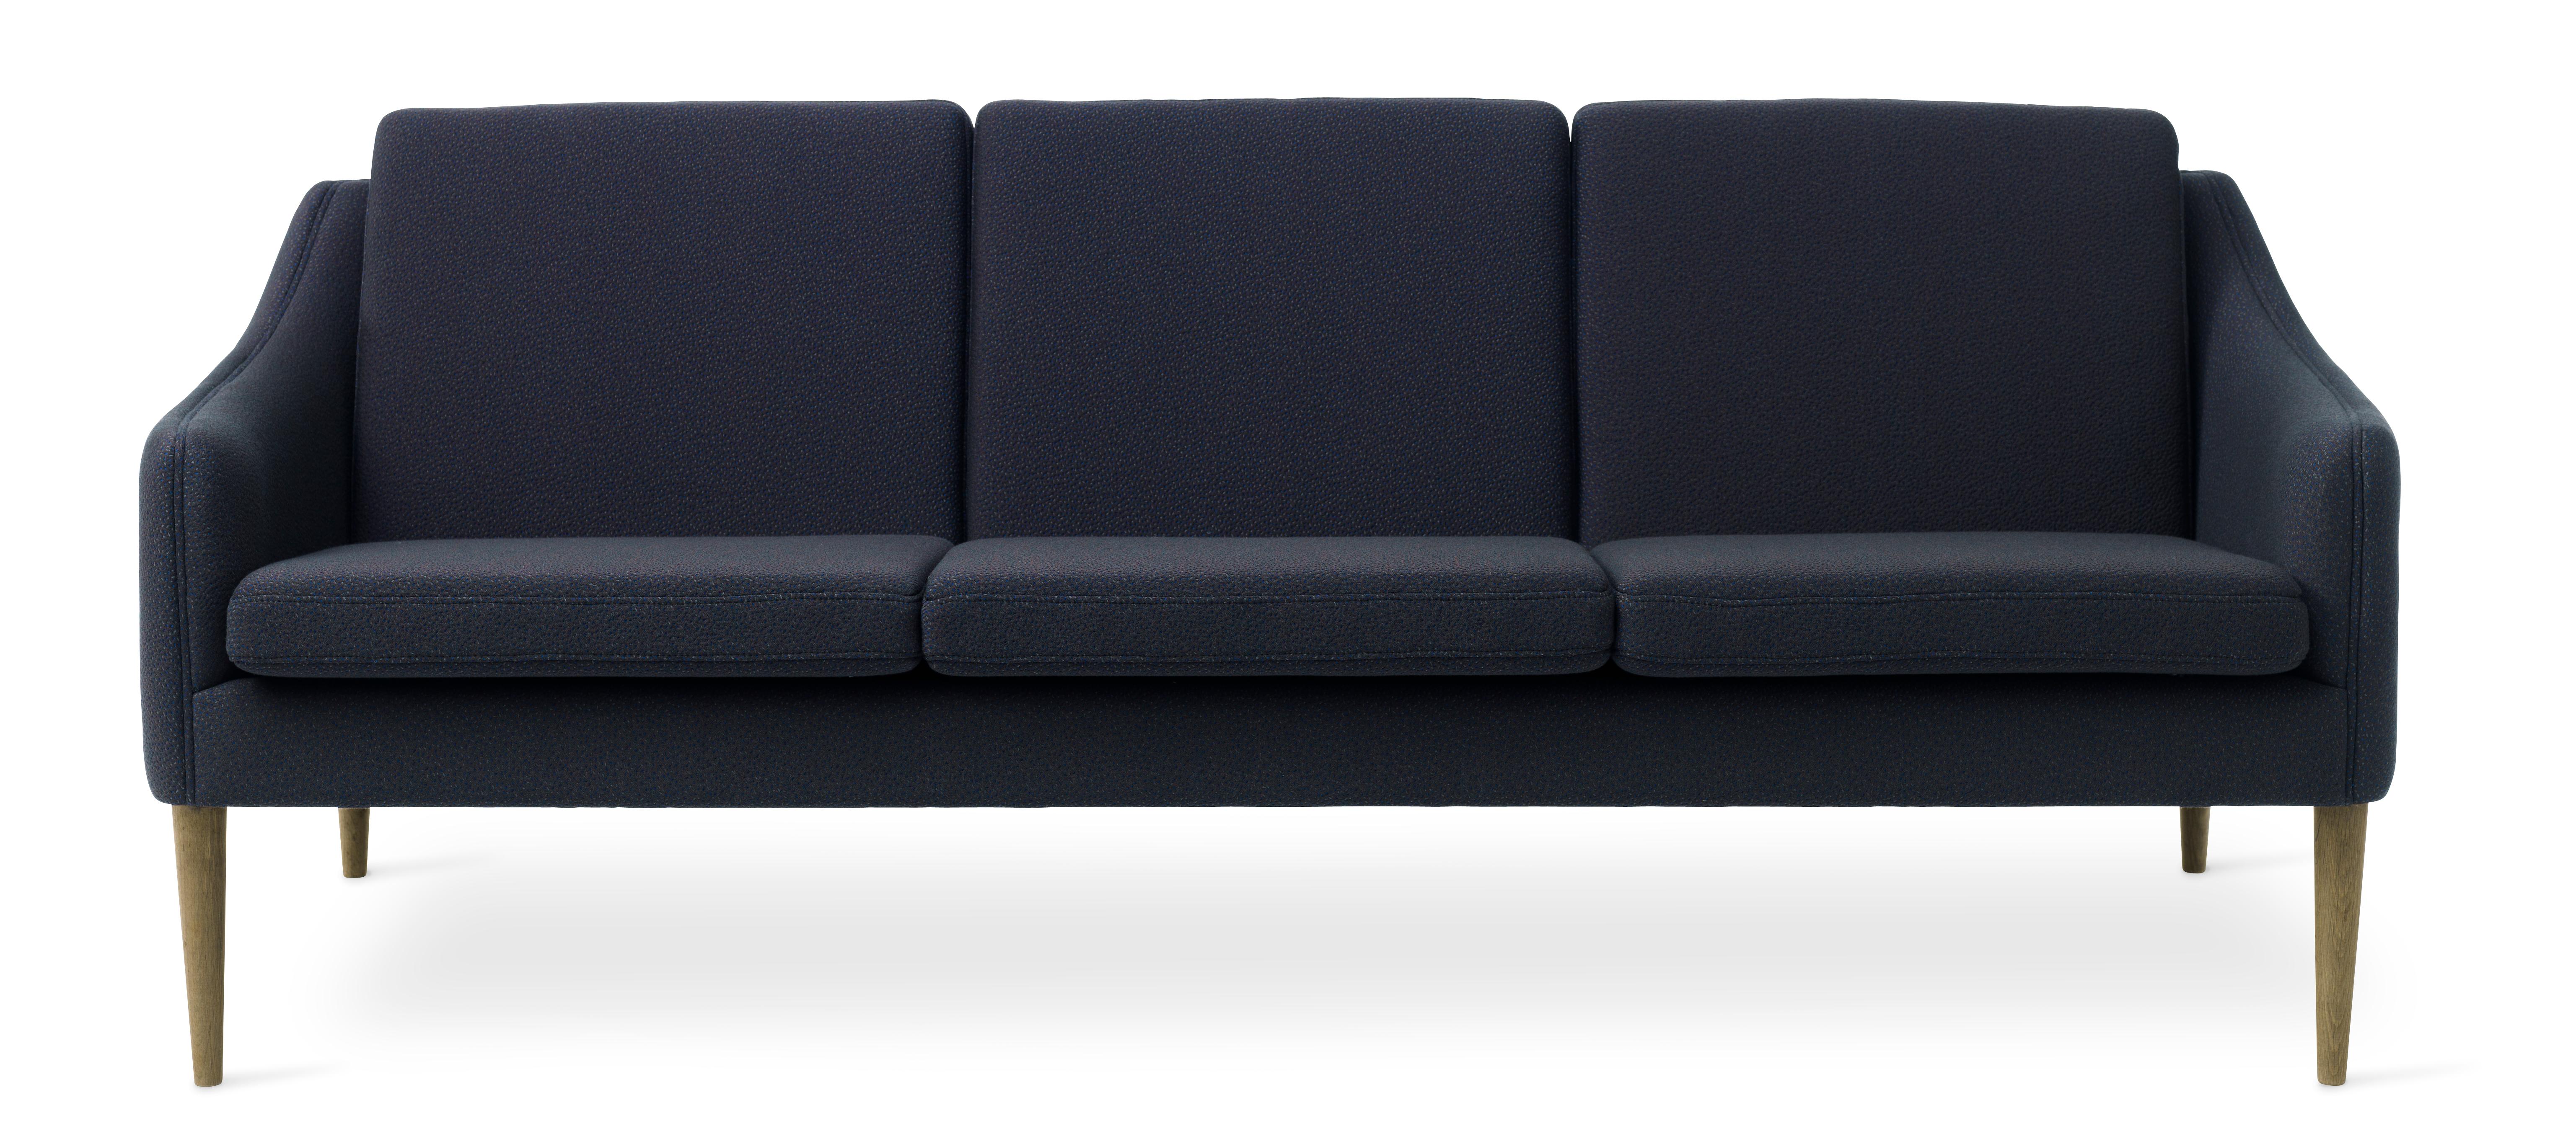 For Sale: Blue (Sprinkles 794) Mr. Olsen 3-Seat Sofa with Smoked Oak Legs, by Hans Olsen from Warm Nordic